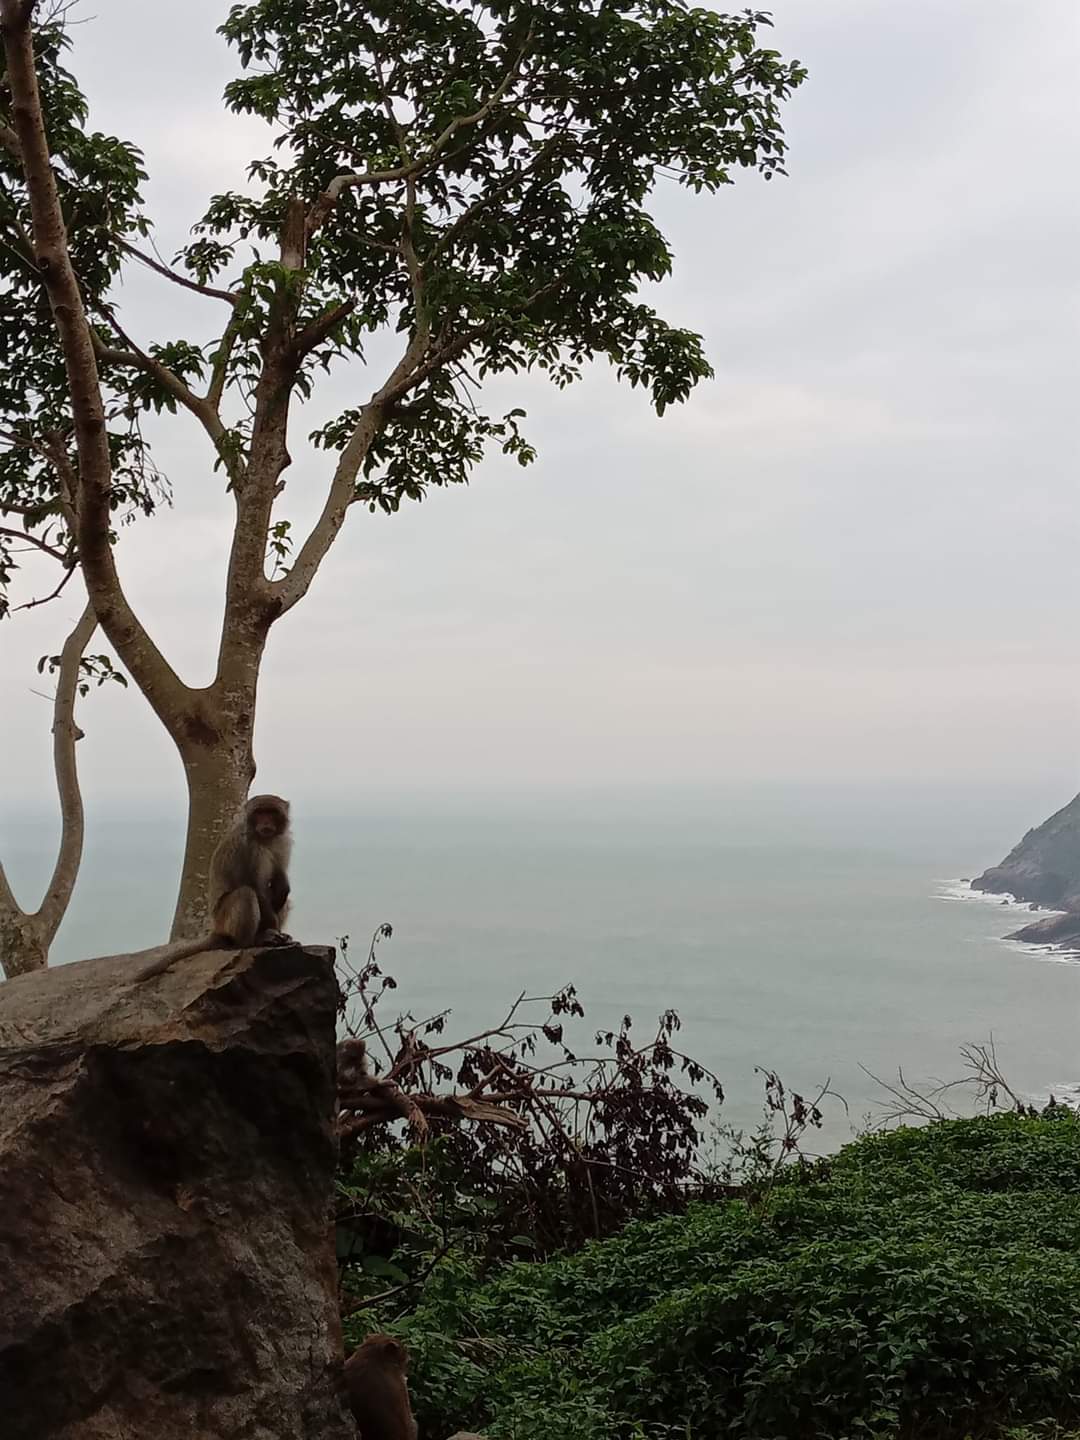 A Macaque monkey sits on a rock on 'Monkey Mountain', above the sea in Vietnam